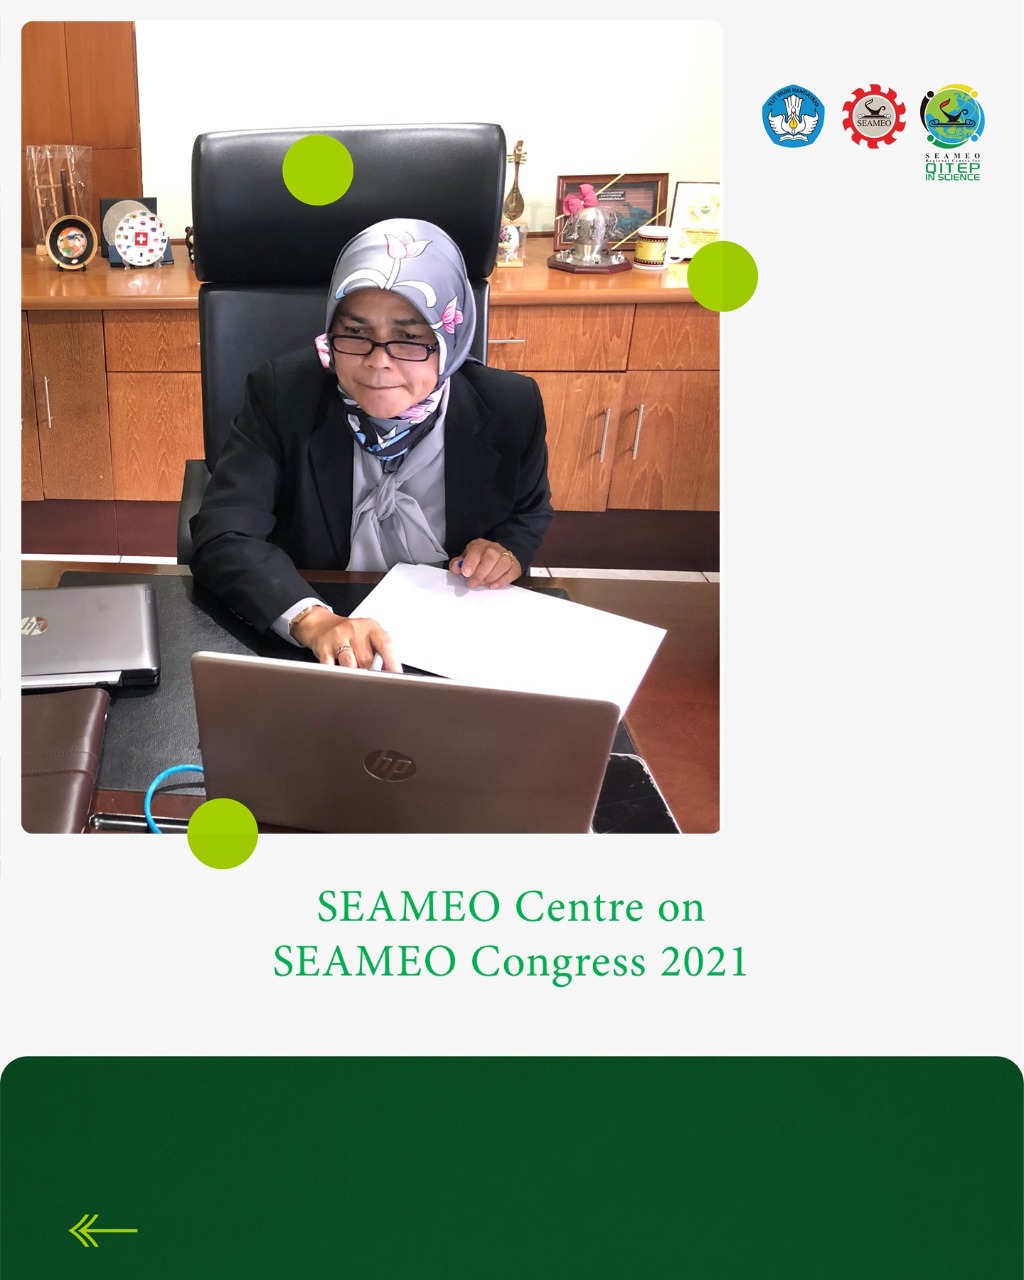 SEAQIS participated in SEAMEO Congress 2021